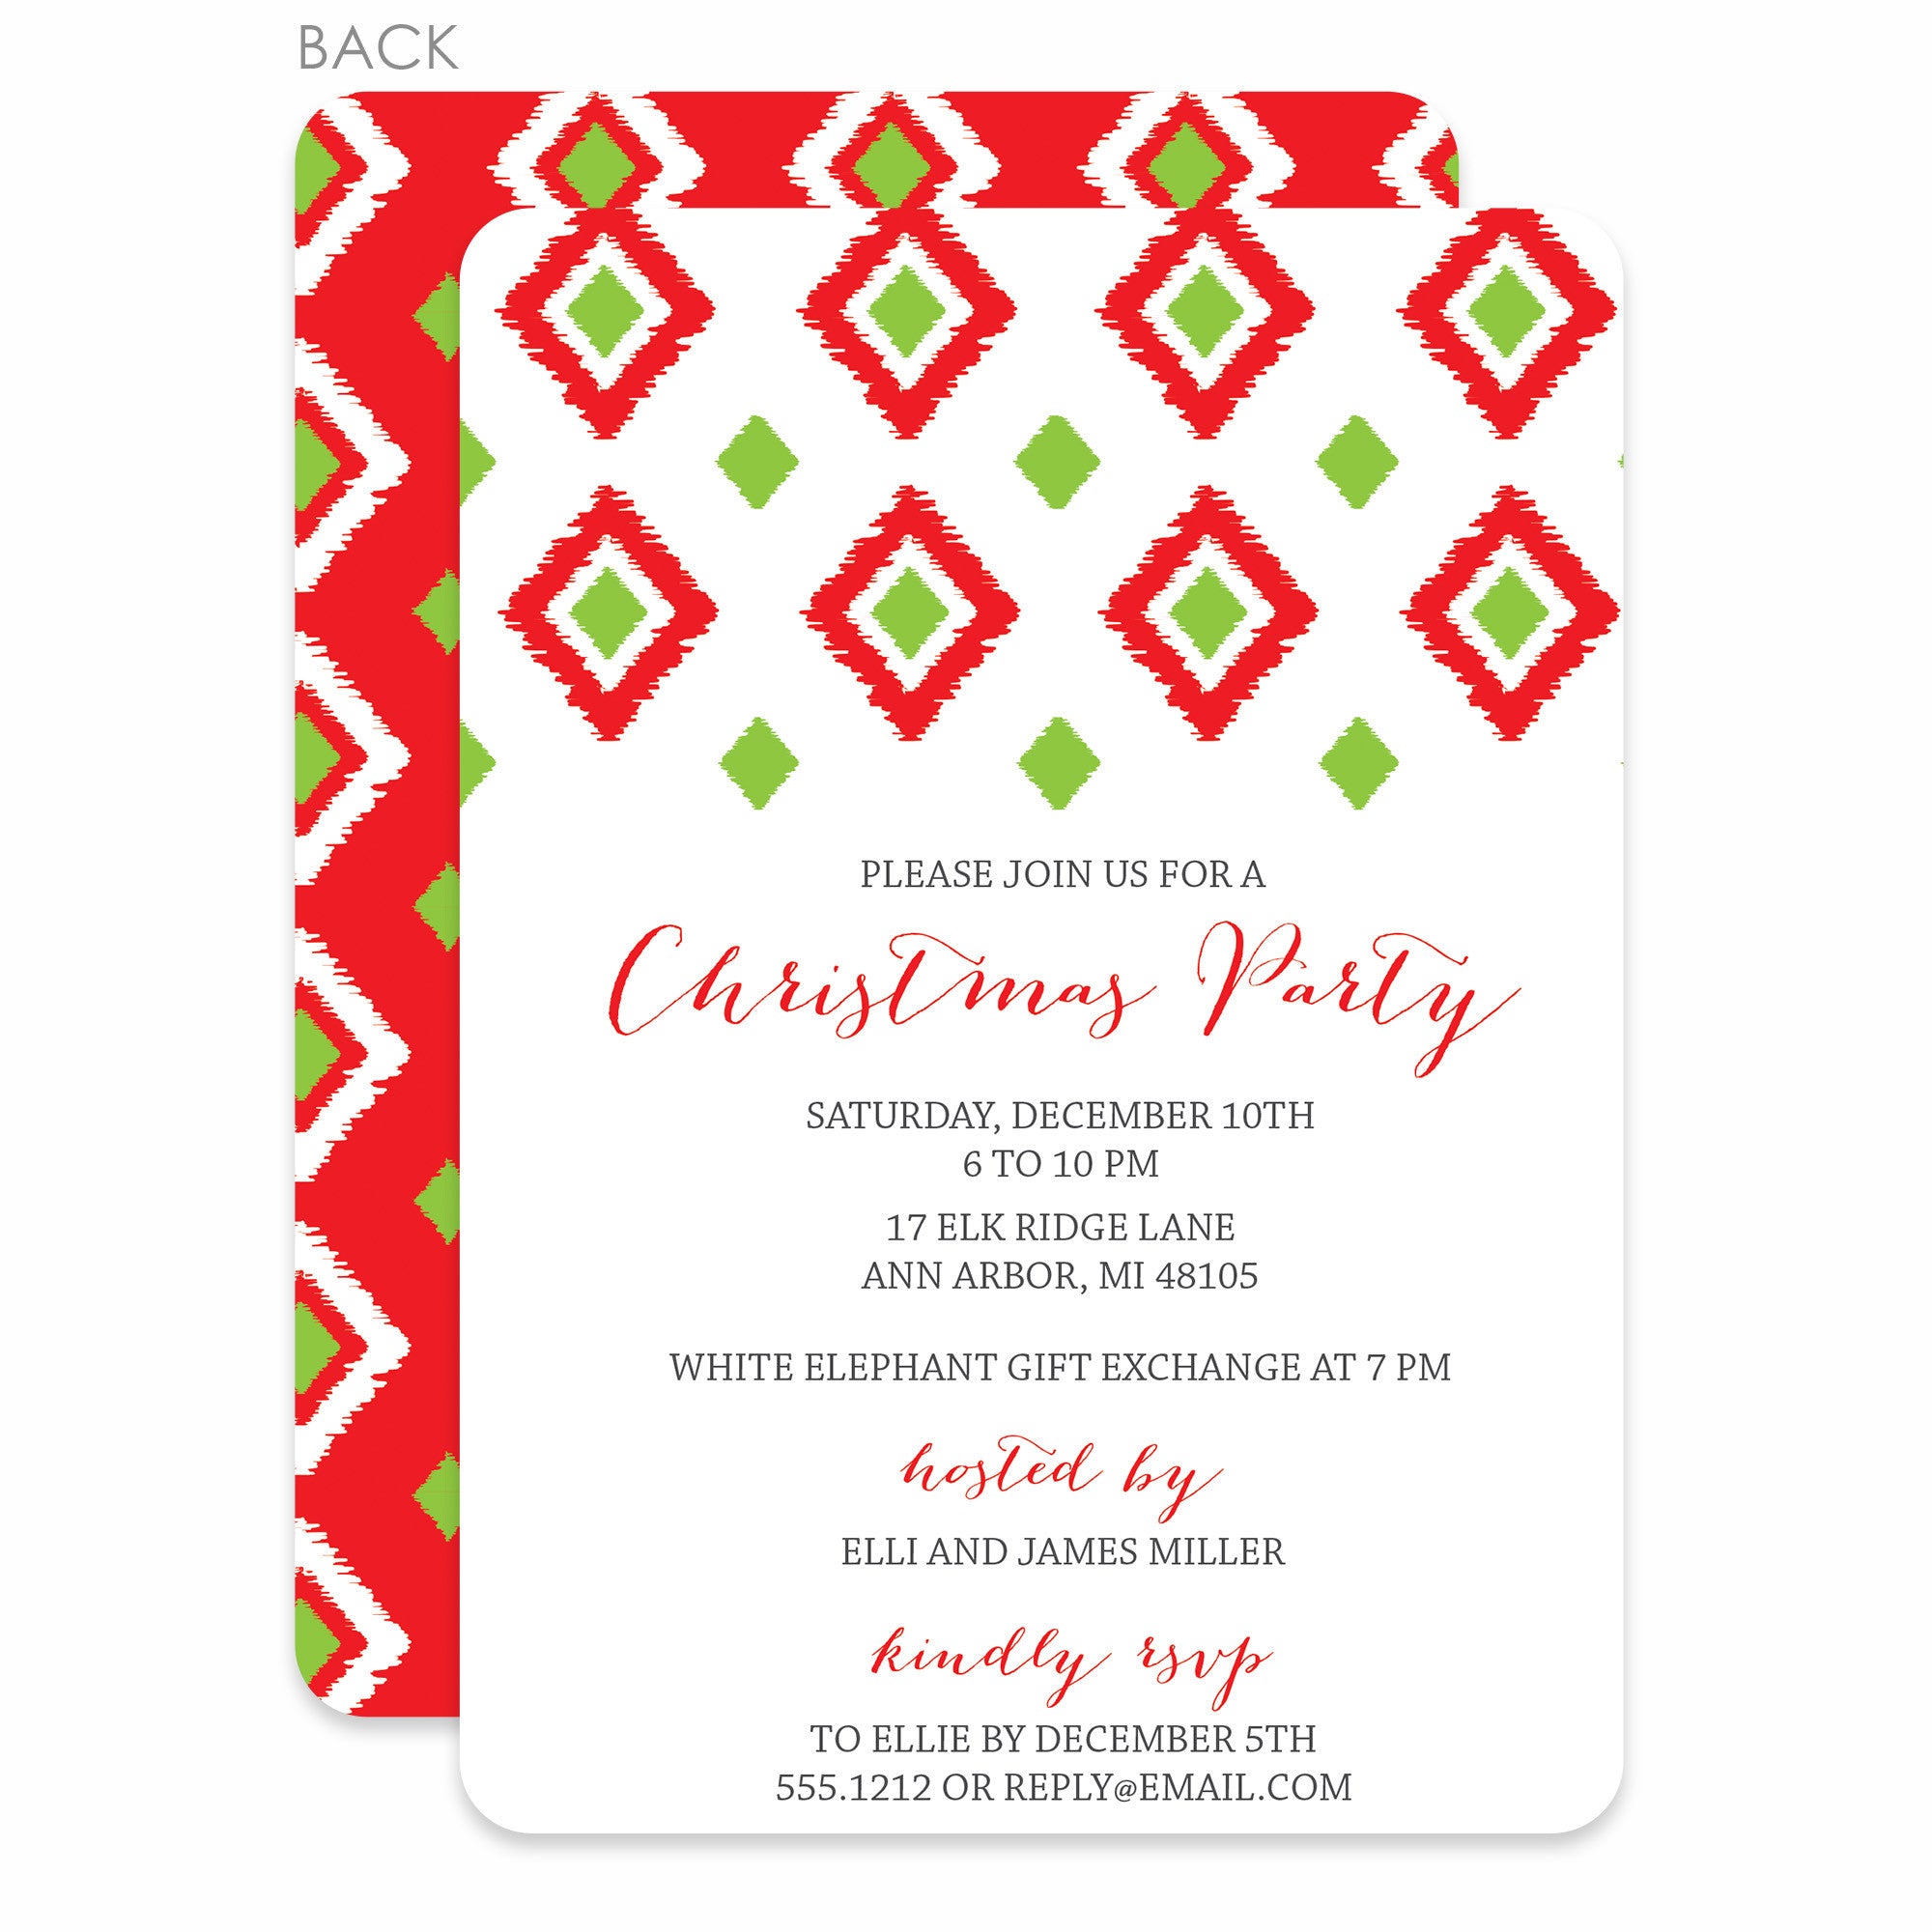 Christmas Open House Party Invitation, Ikat Design, Printed on heavyweight cardstock, from Pipsy.com